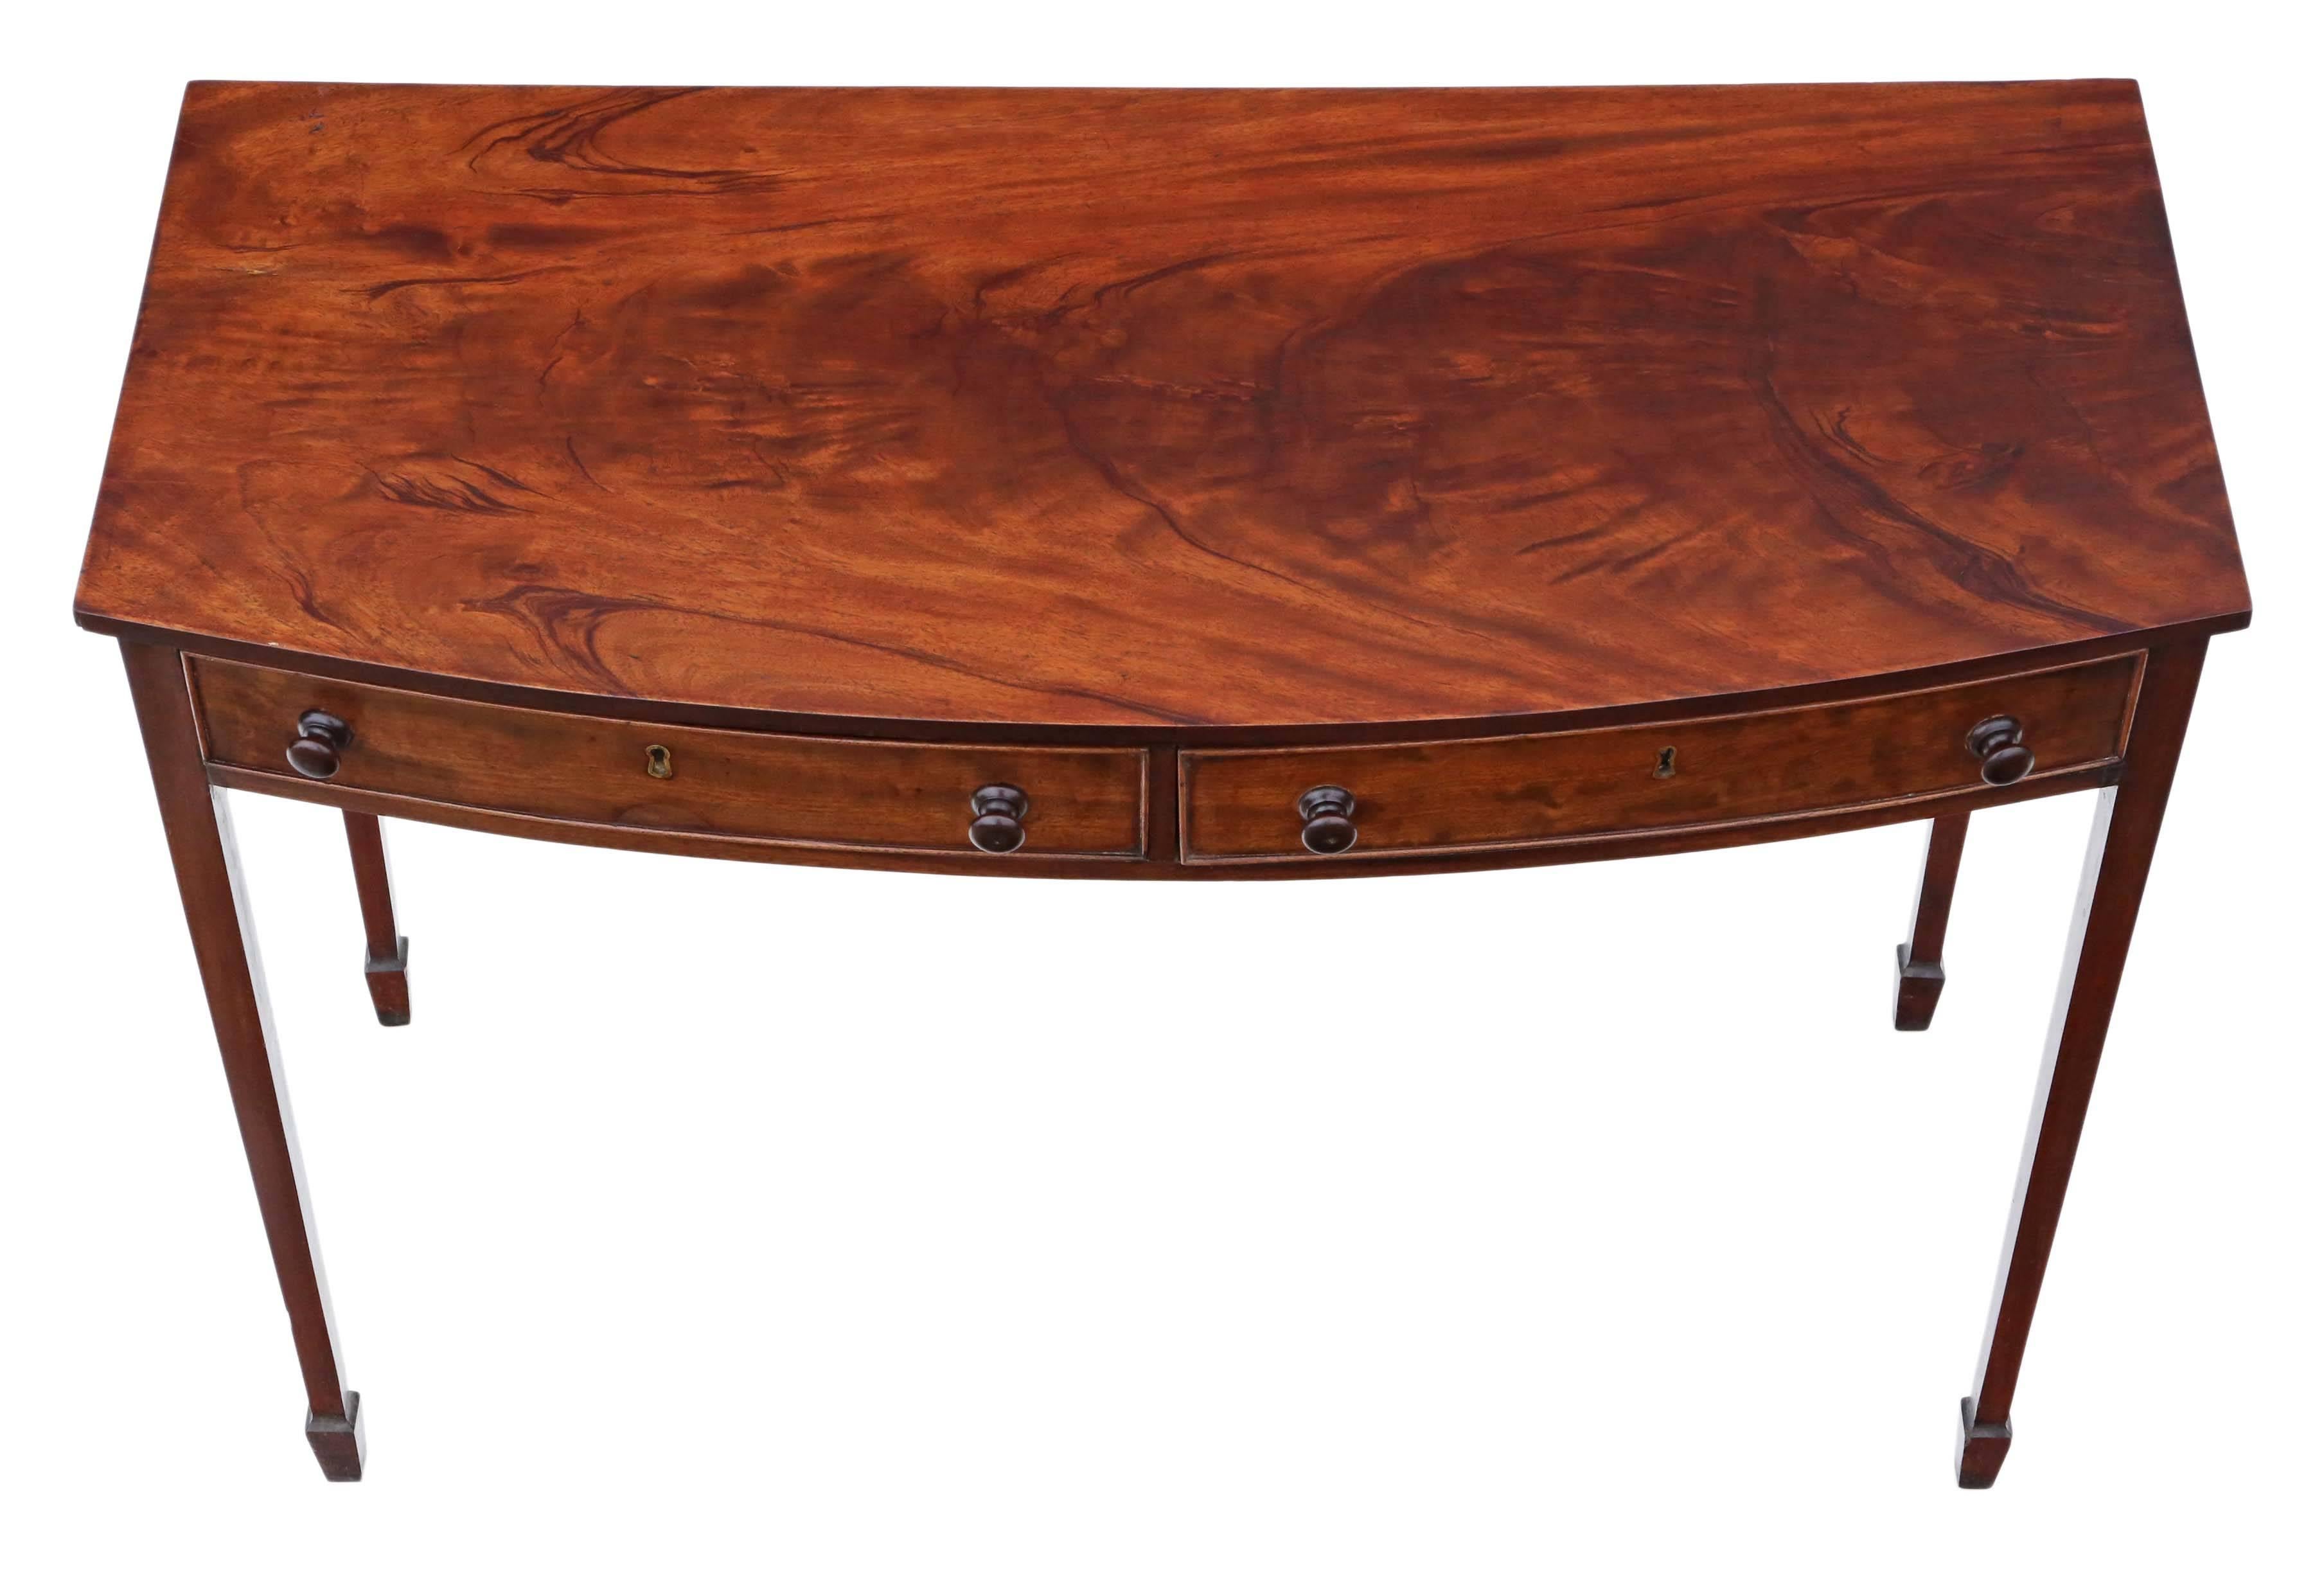 Antique quality bow front flame mahogany desk writing table, 19th century and later. Simple elegant style.

No loose joints. Full of age, character and charm. The drawers slide freely.

Would look great in the right location! No